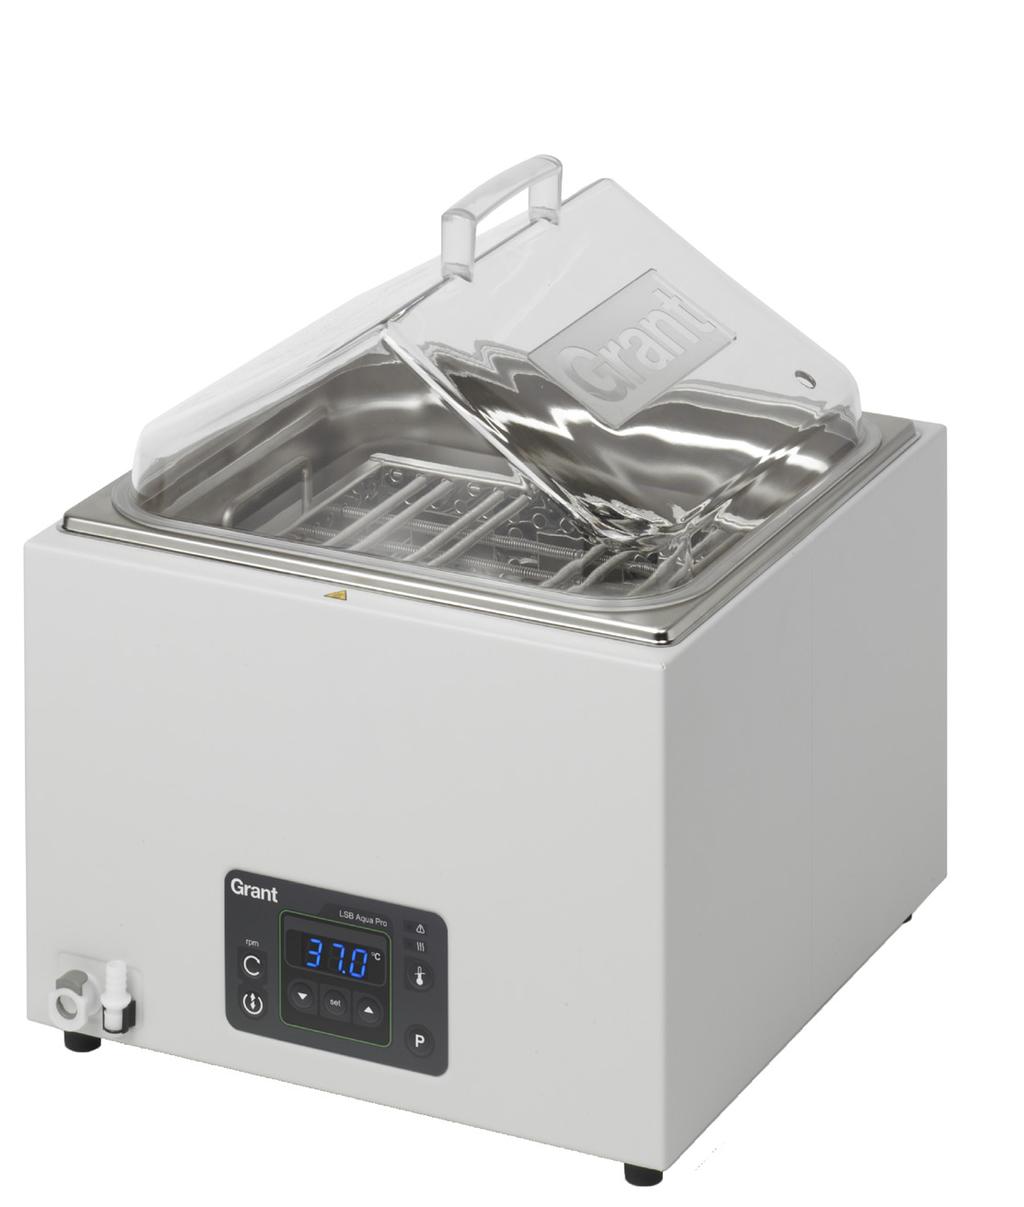 Shaking water baths Shaking water baths» Linear shaking water bath LSB Aqua Pro range Linear shaking water bath LSB Aqua Pro range Grant quality and design combined with the temperature stability and